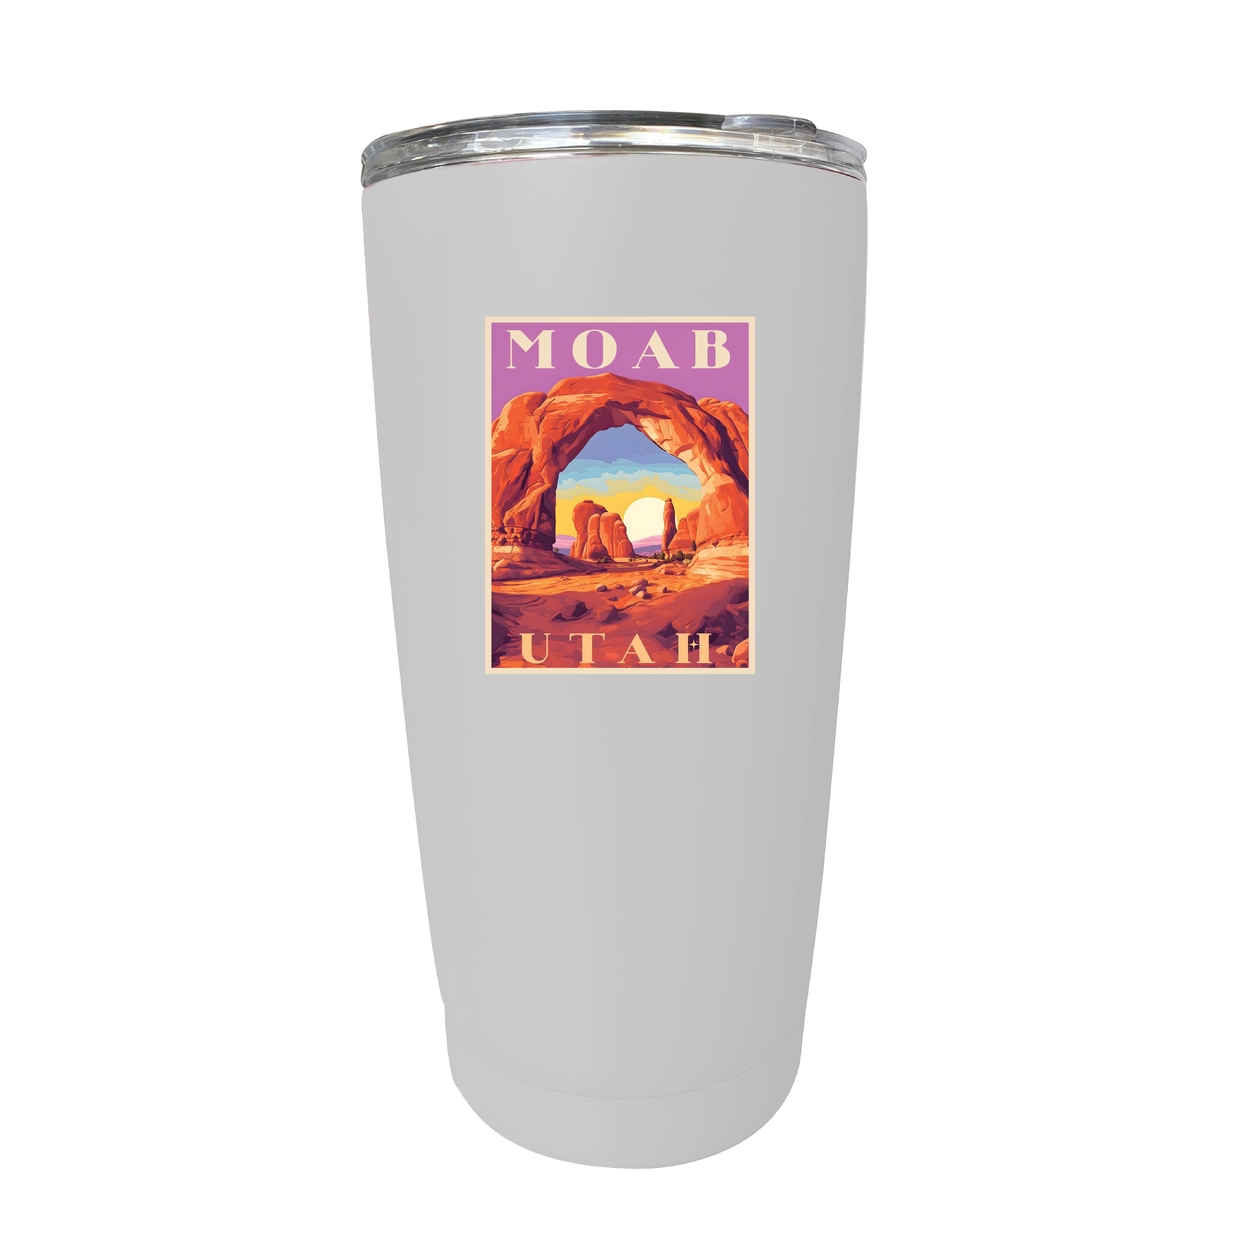 Moab Utah Souvenir 16 Oz Stainless Steel Insulated Tumbler - Yellow,,4-Pack